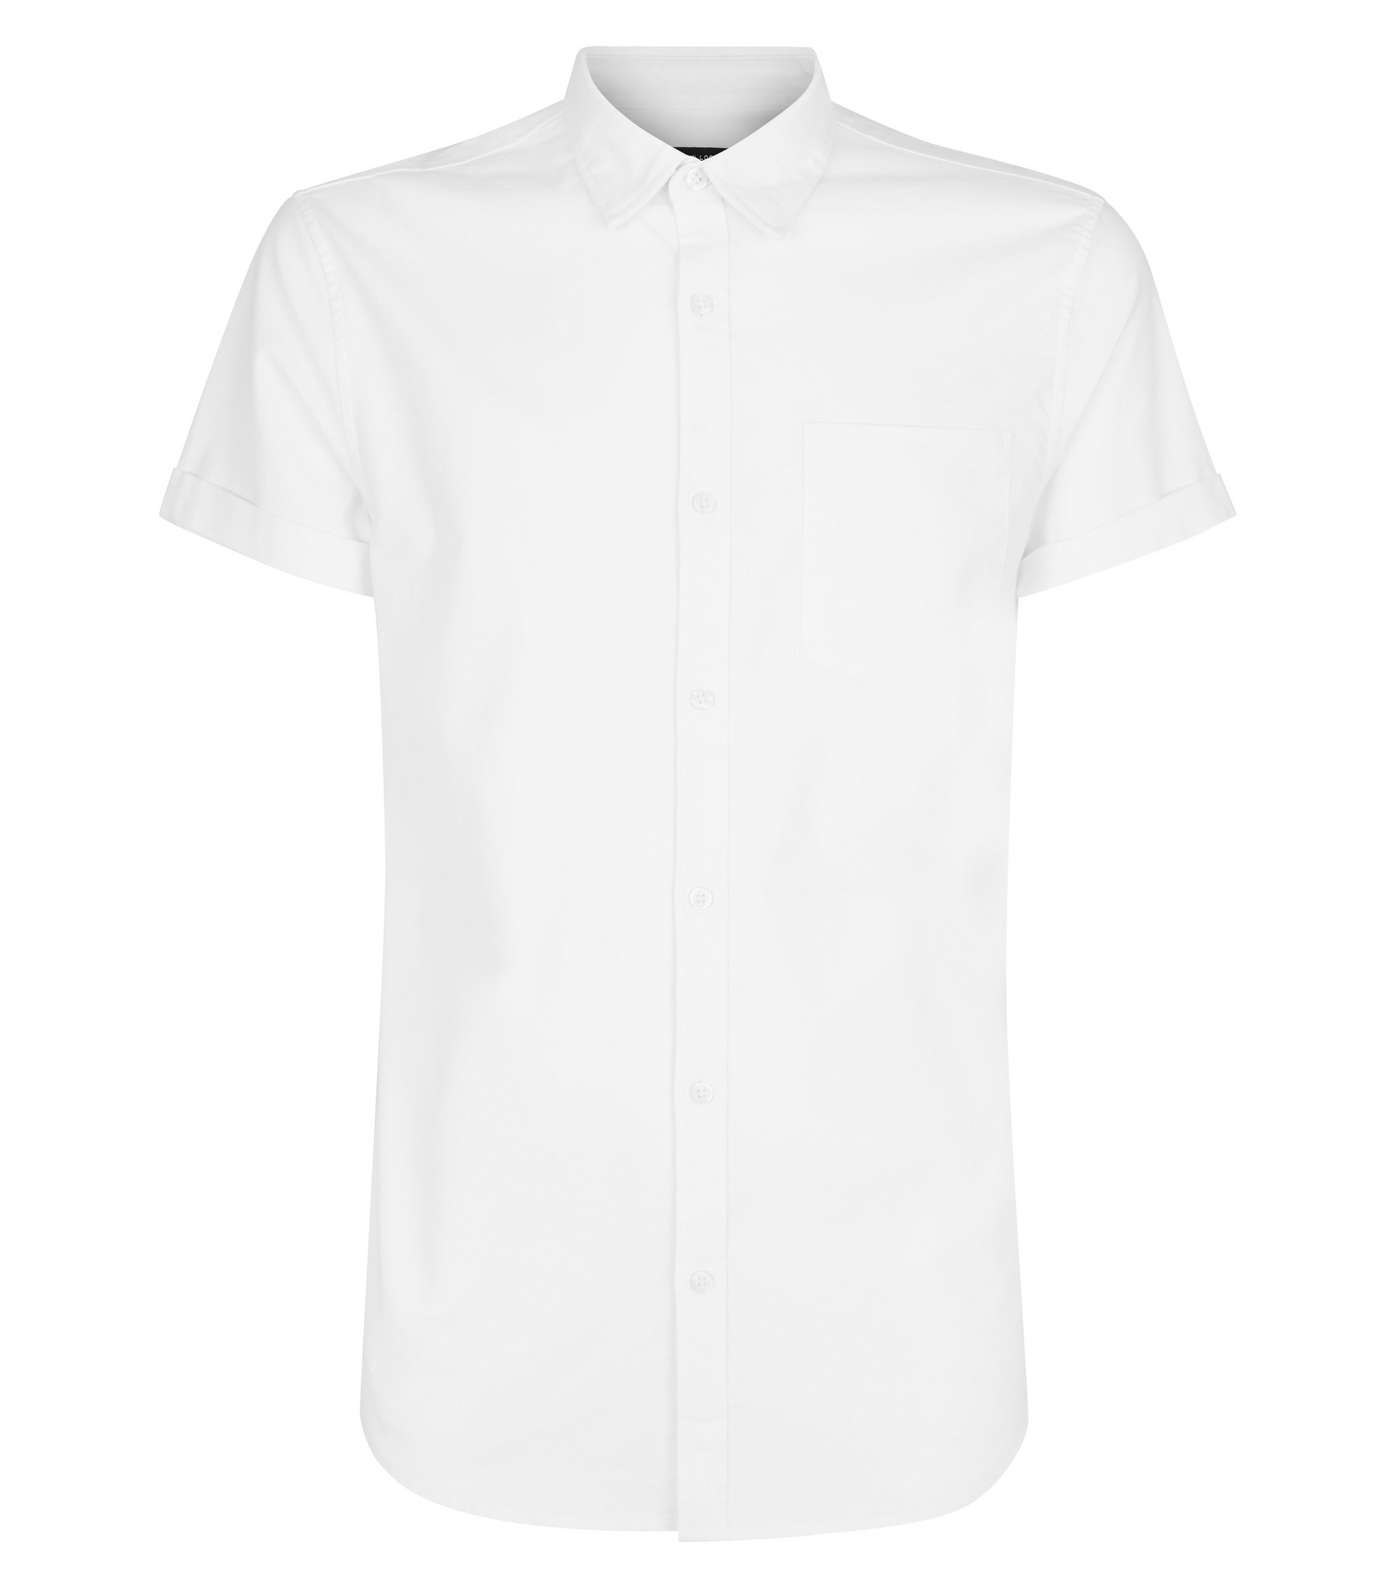 White Short Sleeve Muscle Fit Oxford Shirt Image 4